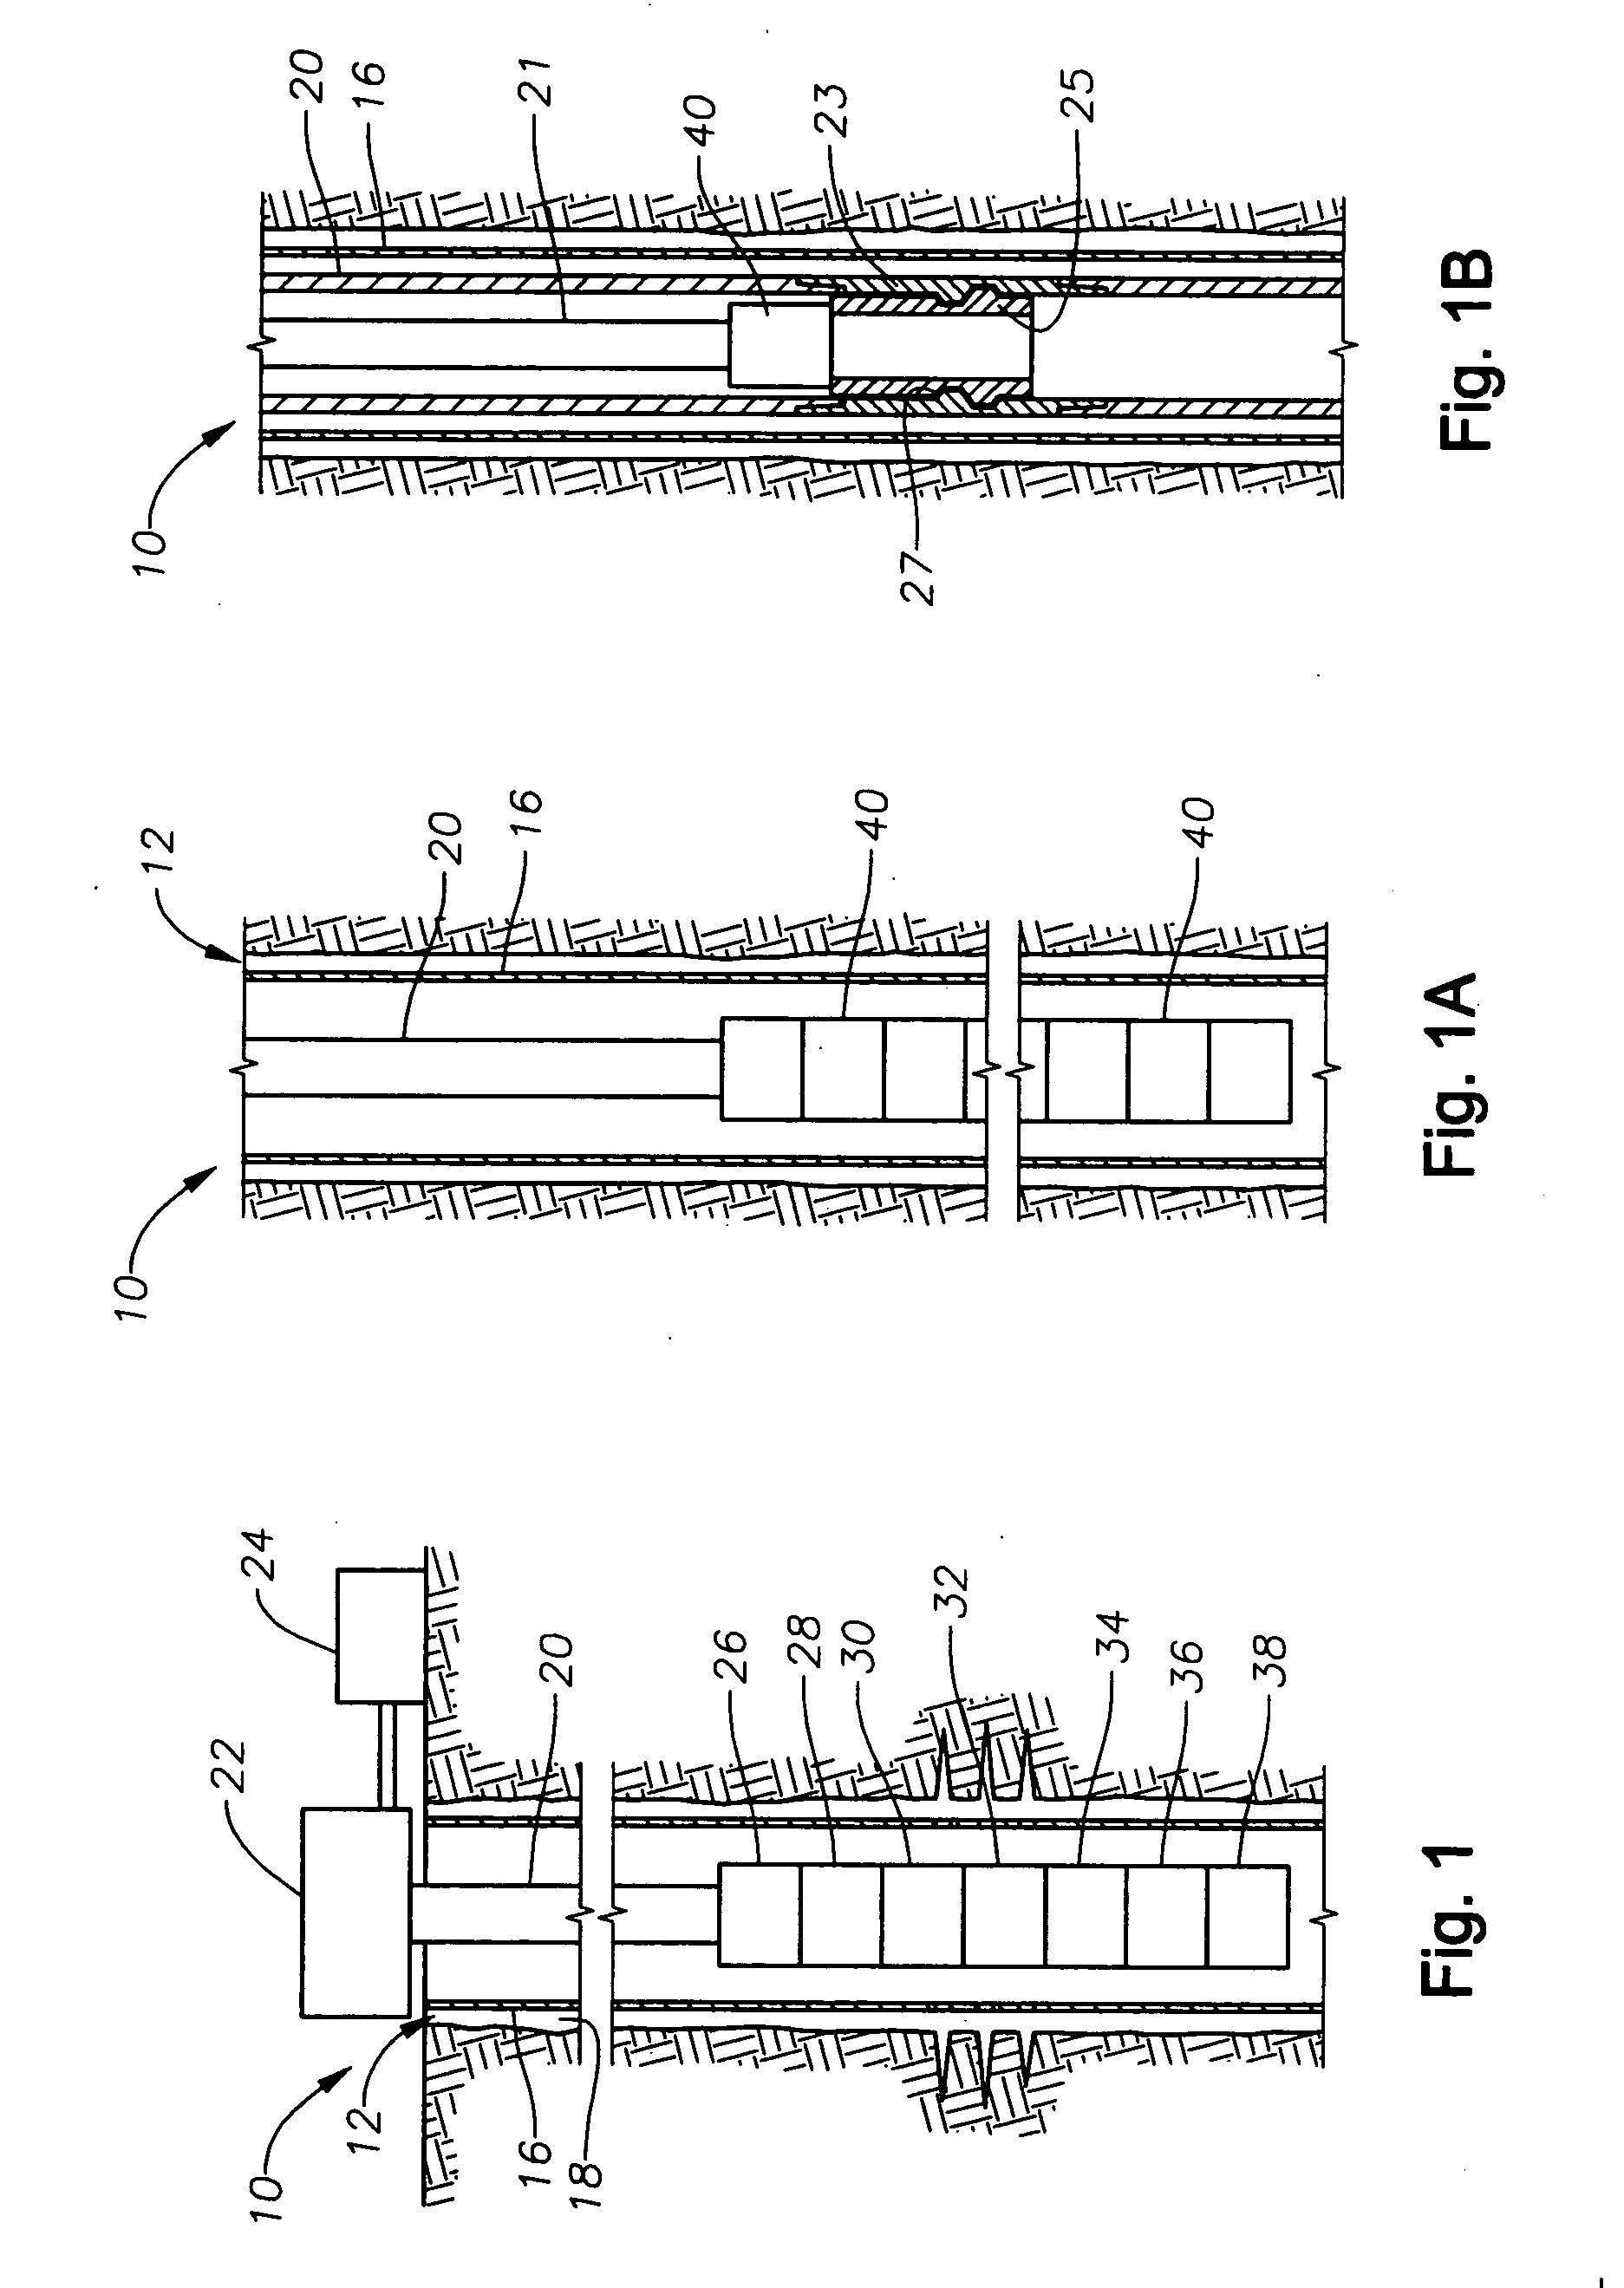 Bi-directional ball seat system and method